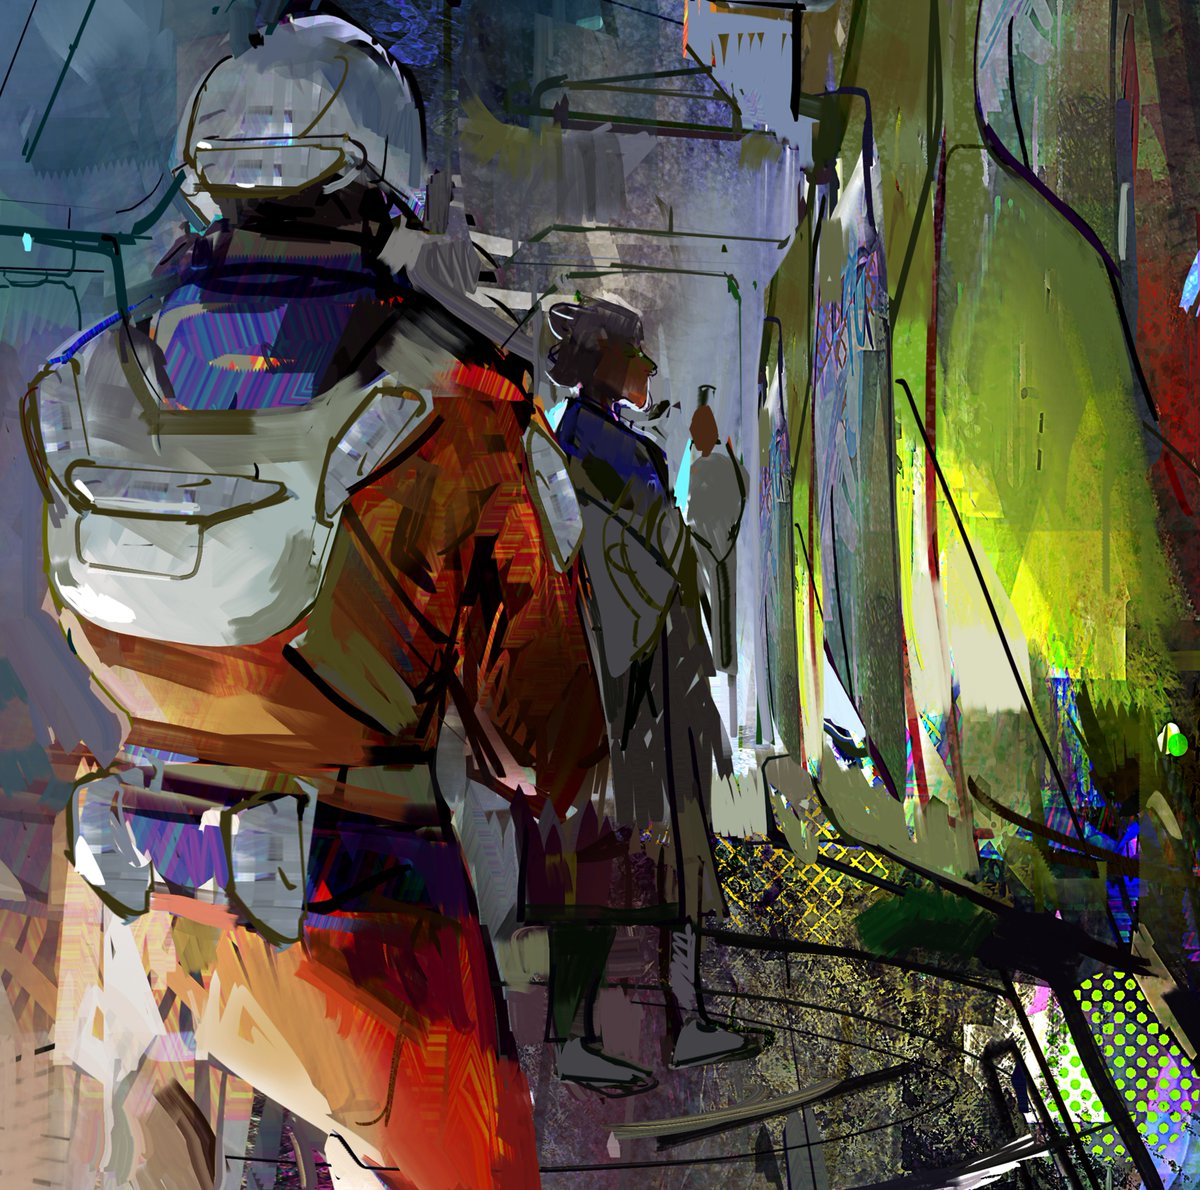 Painted Sketch // Messy Suburbs

For me a city is a big mess of lines and colors I guess.

#digitalsketch #digitalsketchbook #digitalpainting  #illustrator #scifiart #scifiartwork #urbanart #urban #digitalart #digitalartist #vehicledesign #conceptartist